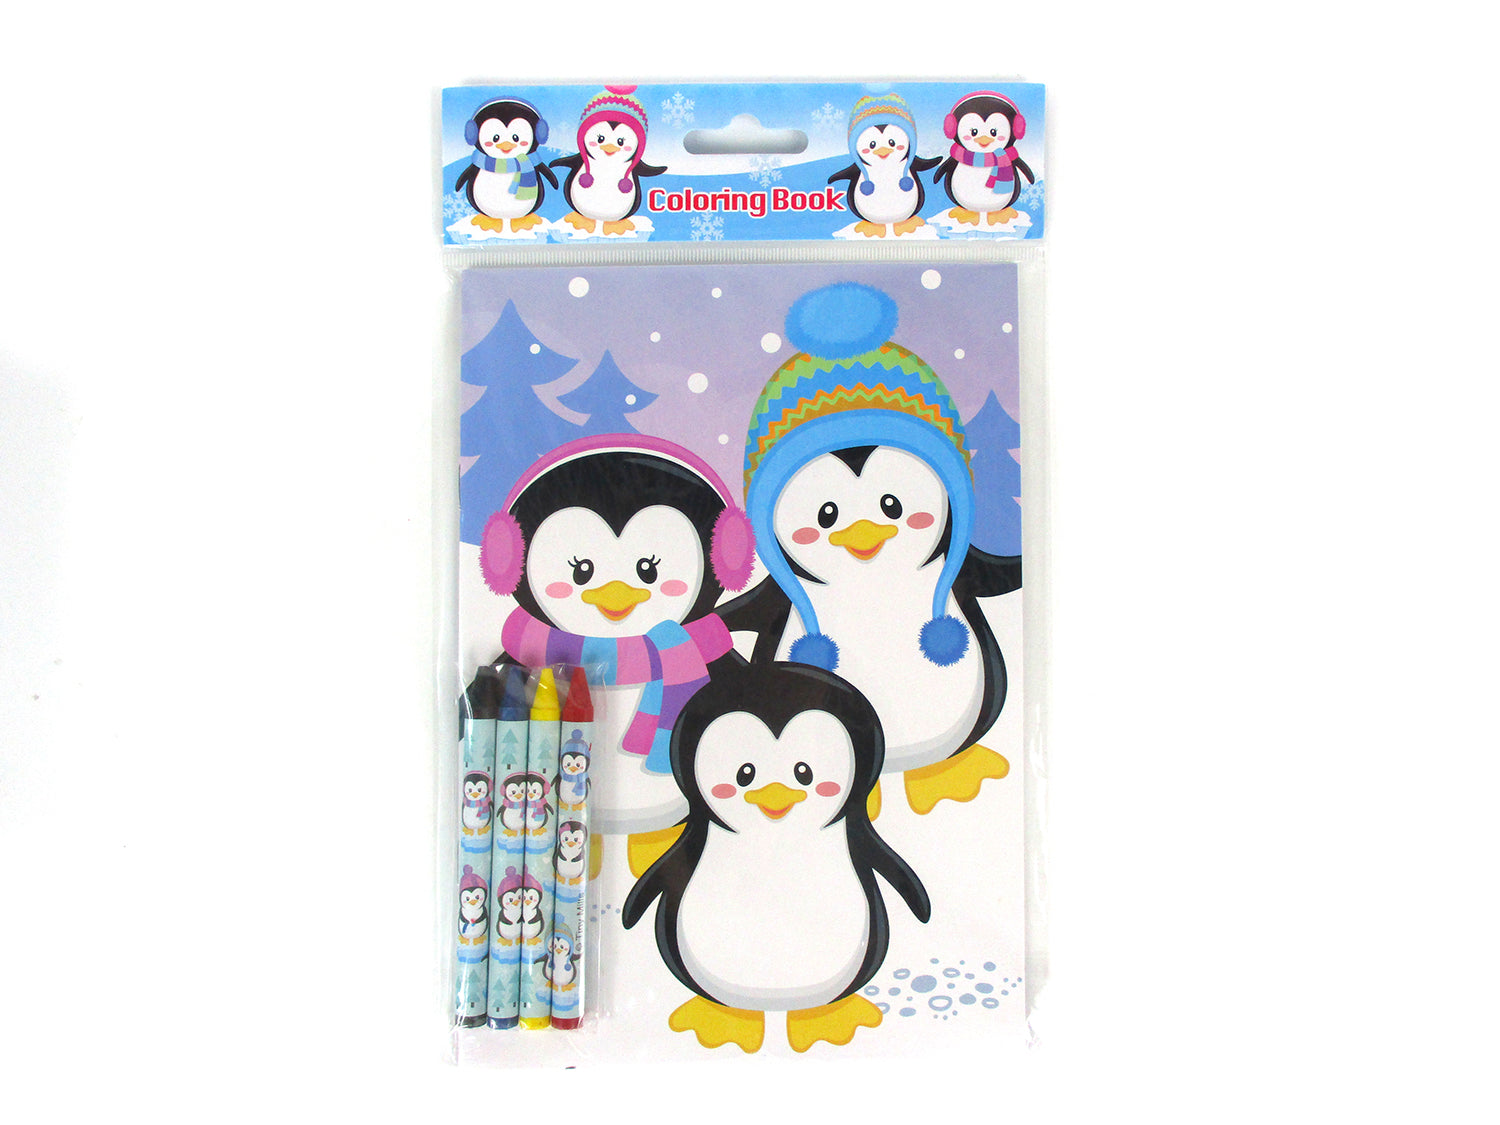 TINYMILLS Winter Snowman Penguins Coloring Book Crayon Set for Kids Party Favors with 12 Coloring Books and 48 Crayons for Holiday Goody Bag